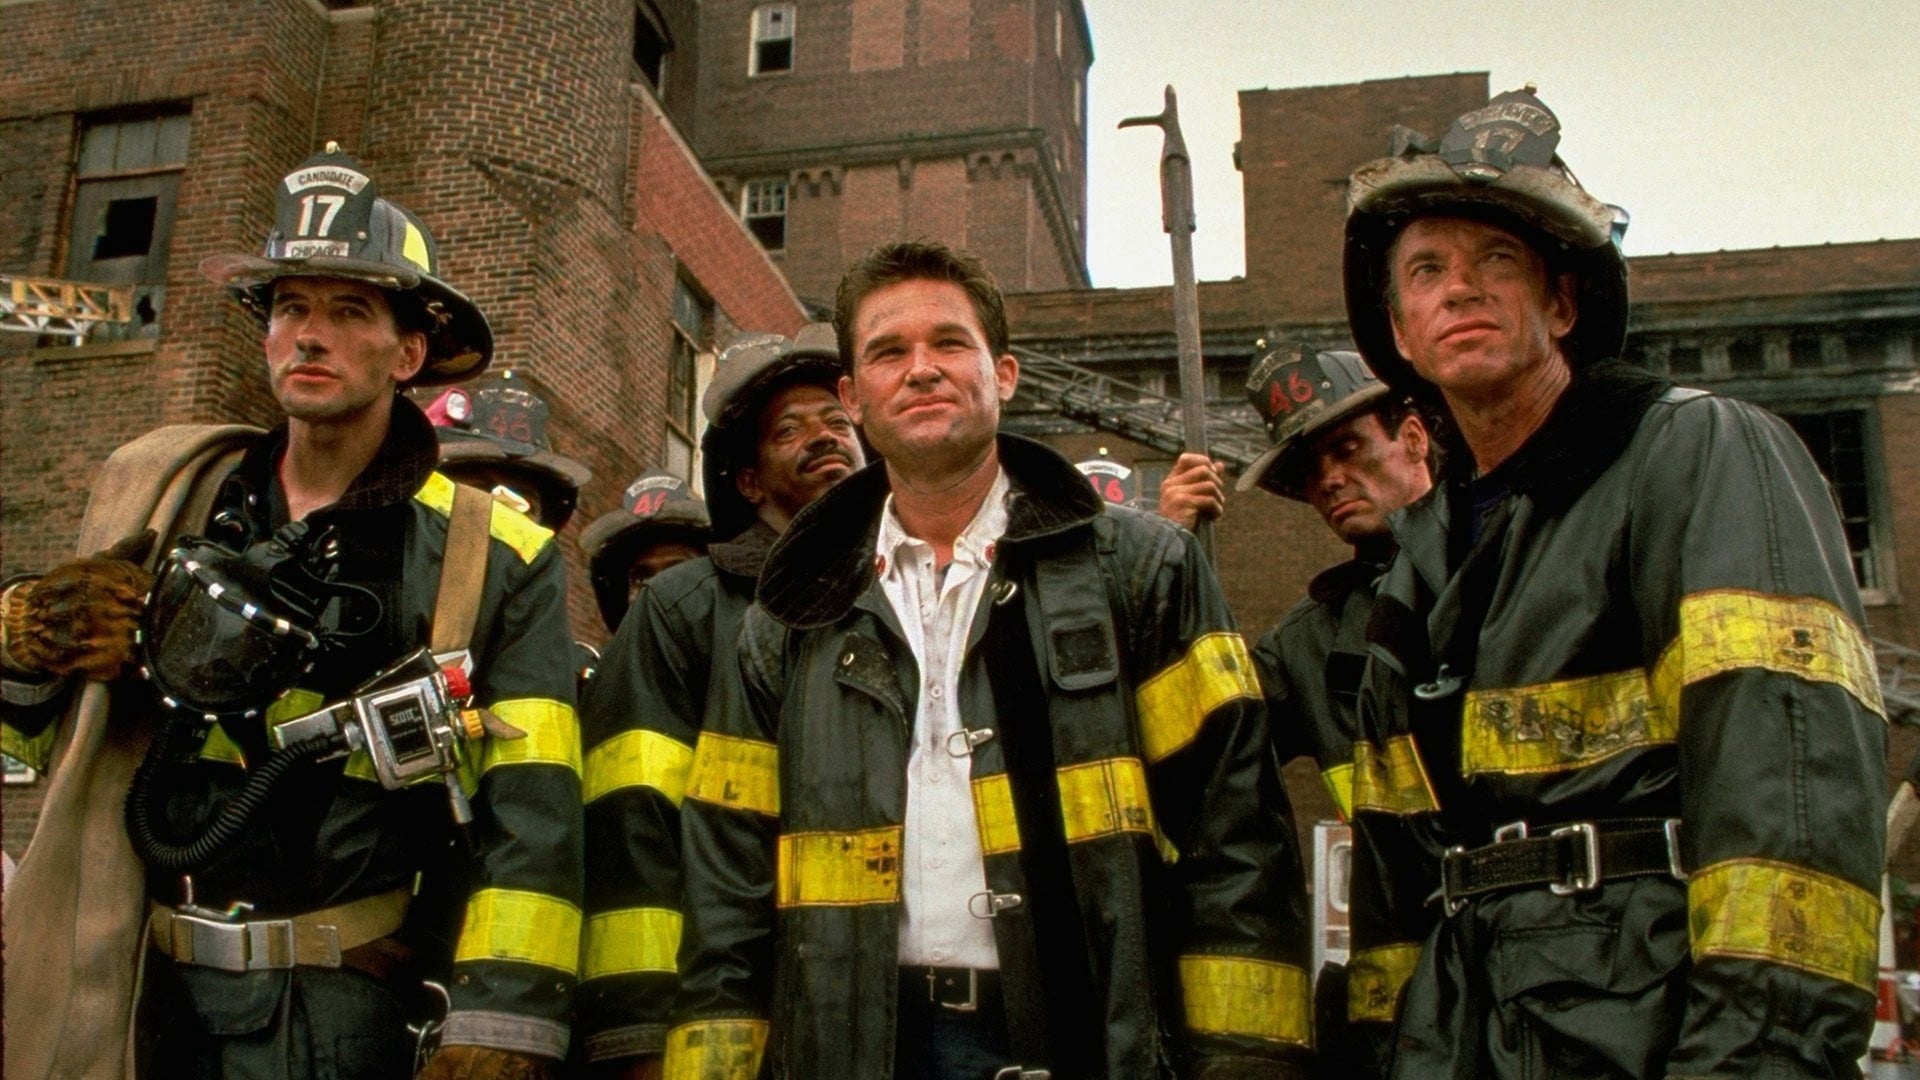 Backdraft, Mnner die durchs Feuer gehen, Kurt Russell's role, Movie available on The Movie Database, 1920x1080 Full HD Desktop